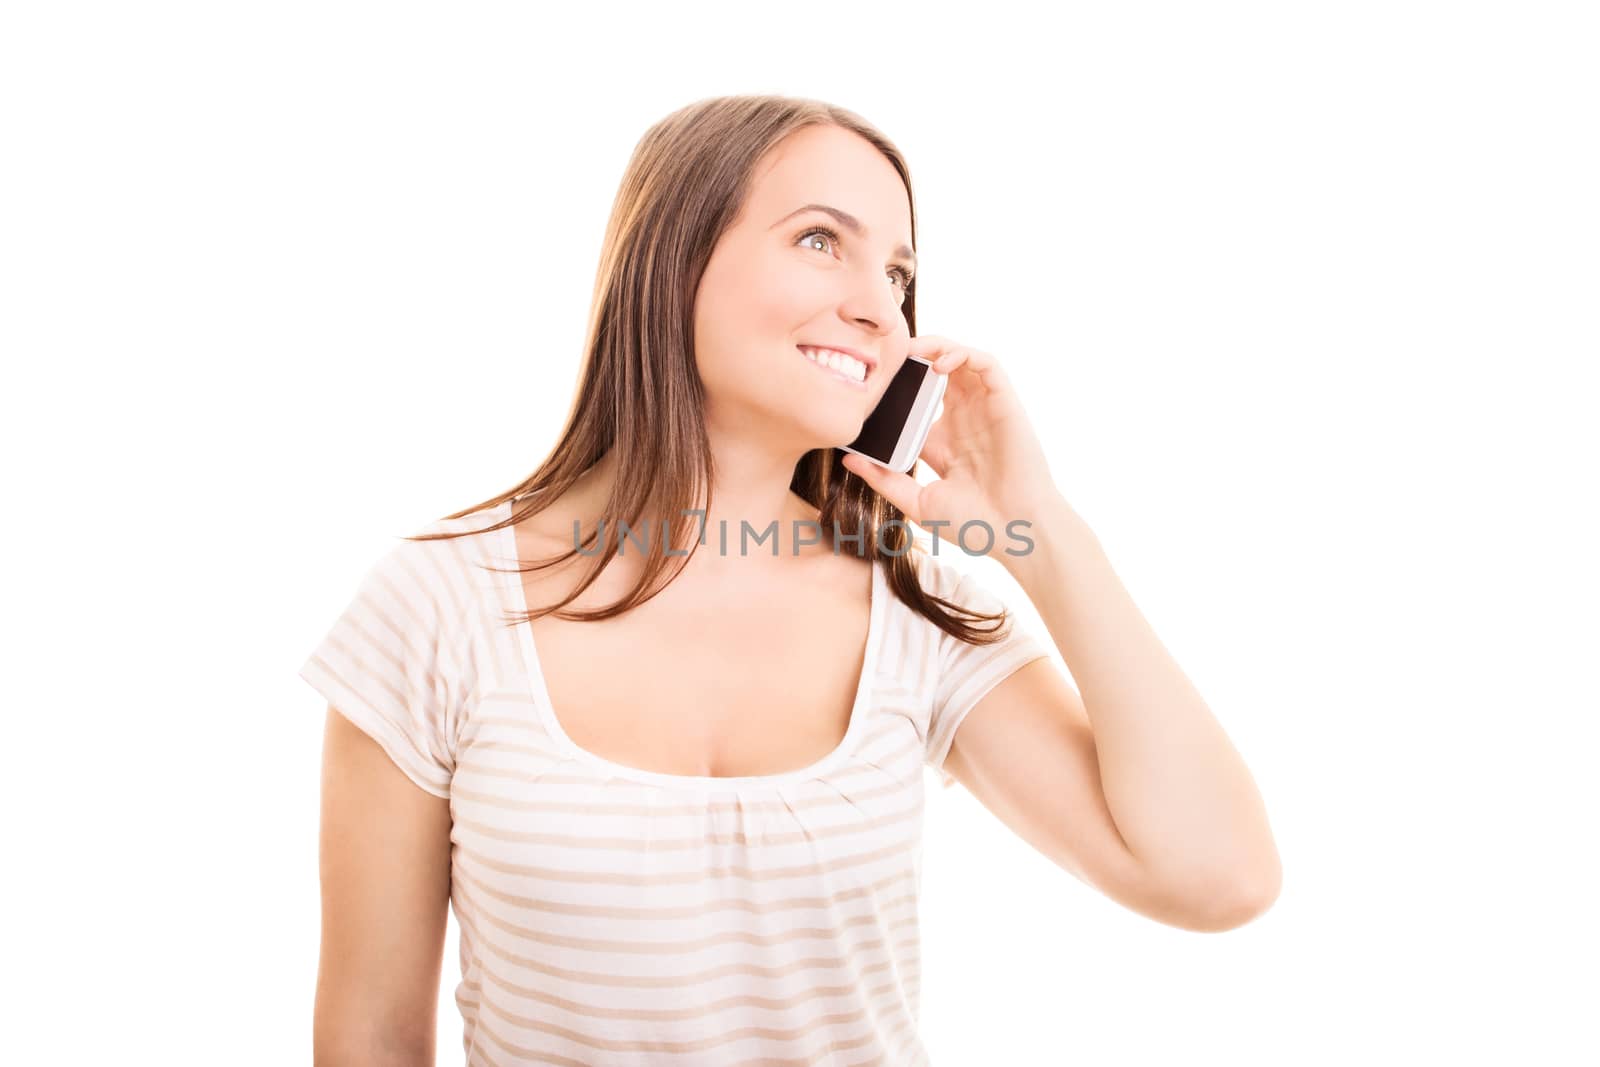 Beautiful young girl talking on a phone, isolated on white background.